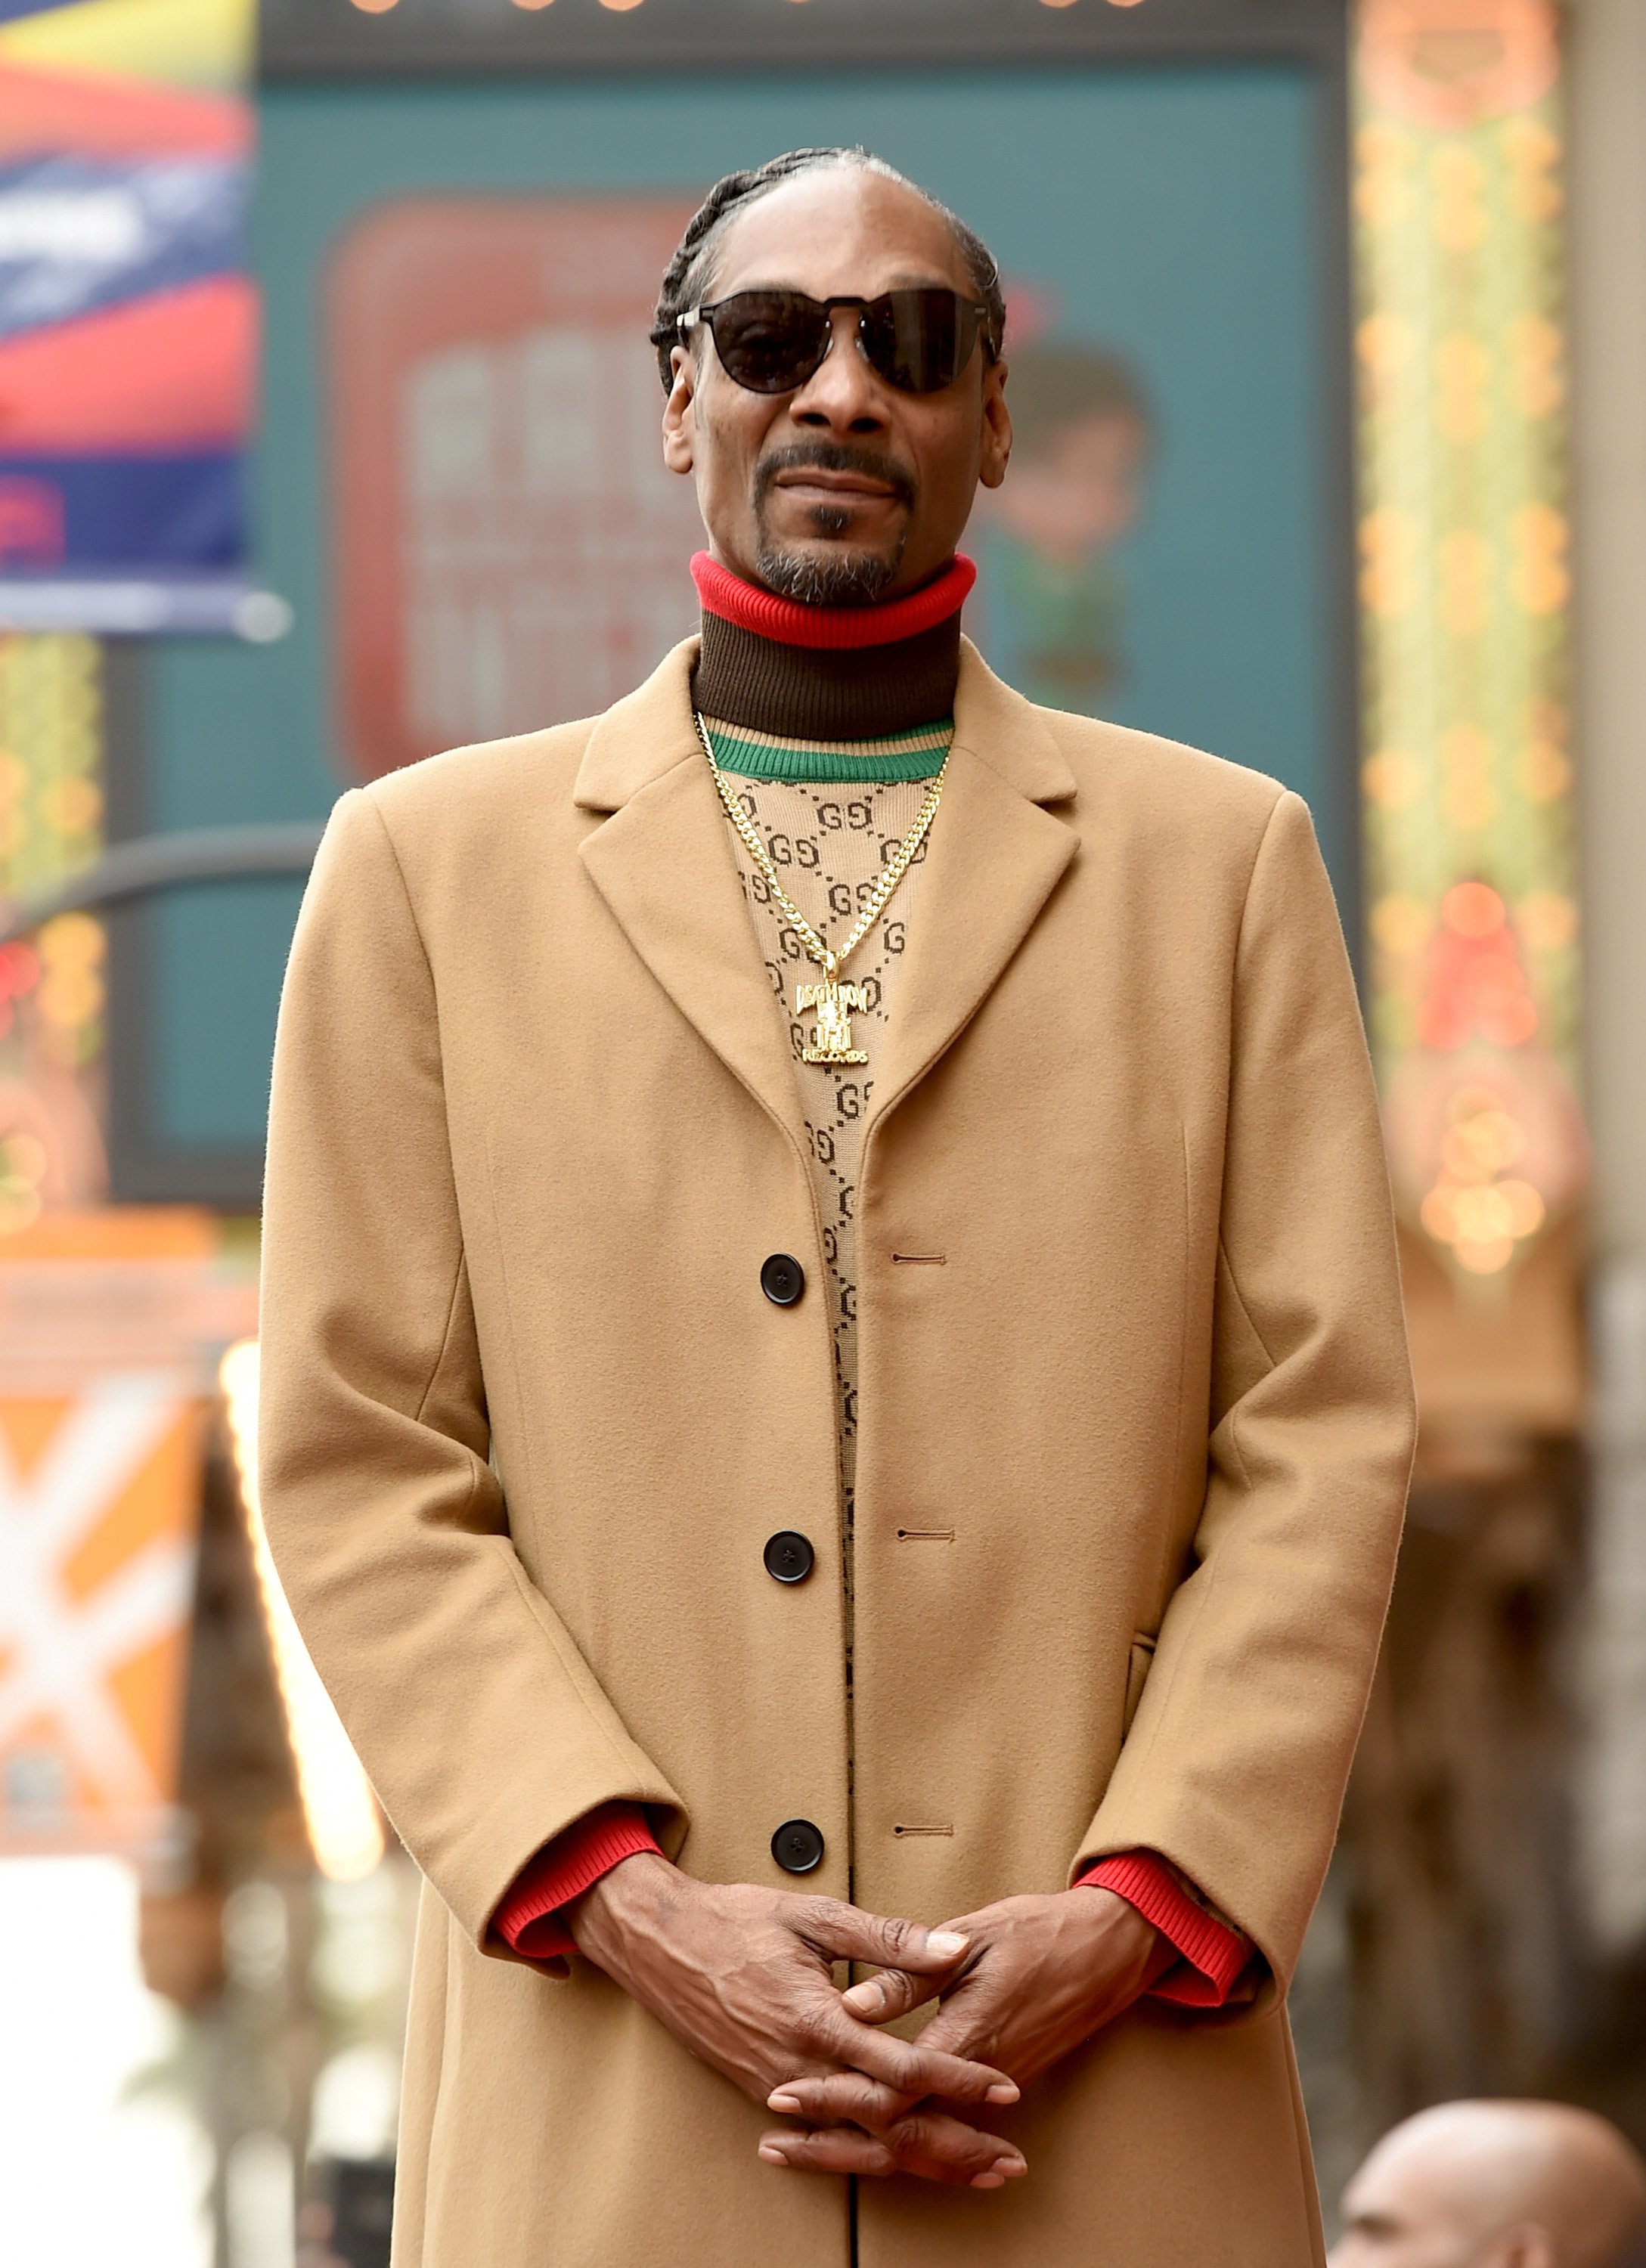 Snoop Dogg getting his star on The Hollywood Walk Of Fame in LA on Nov. 19, 2018 | Photo: Getty Images